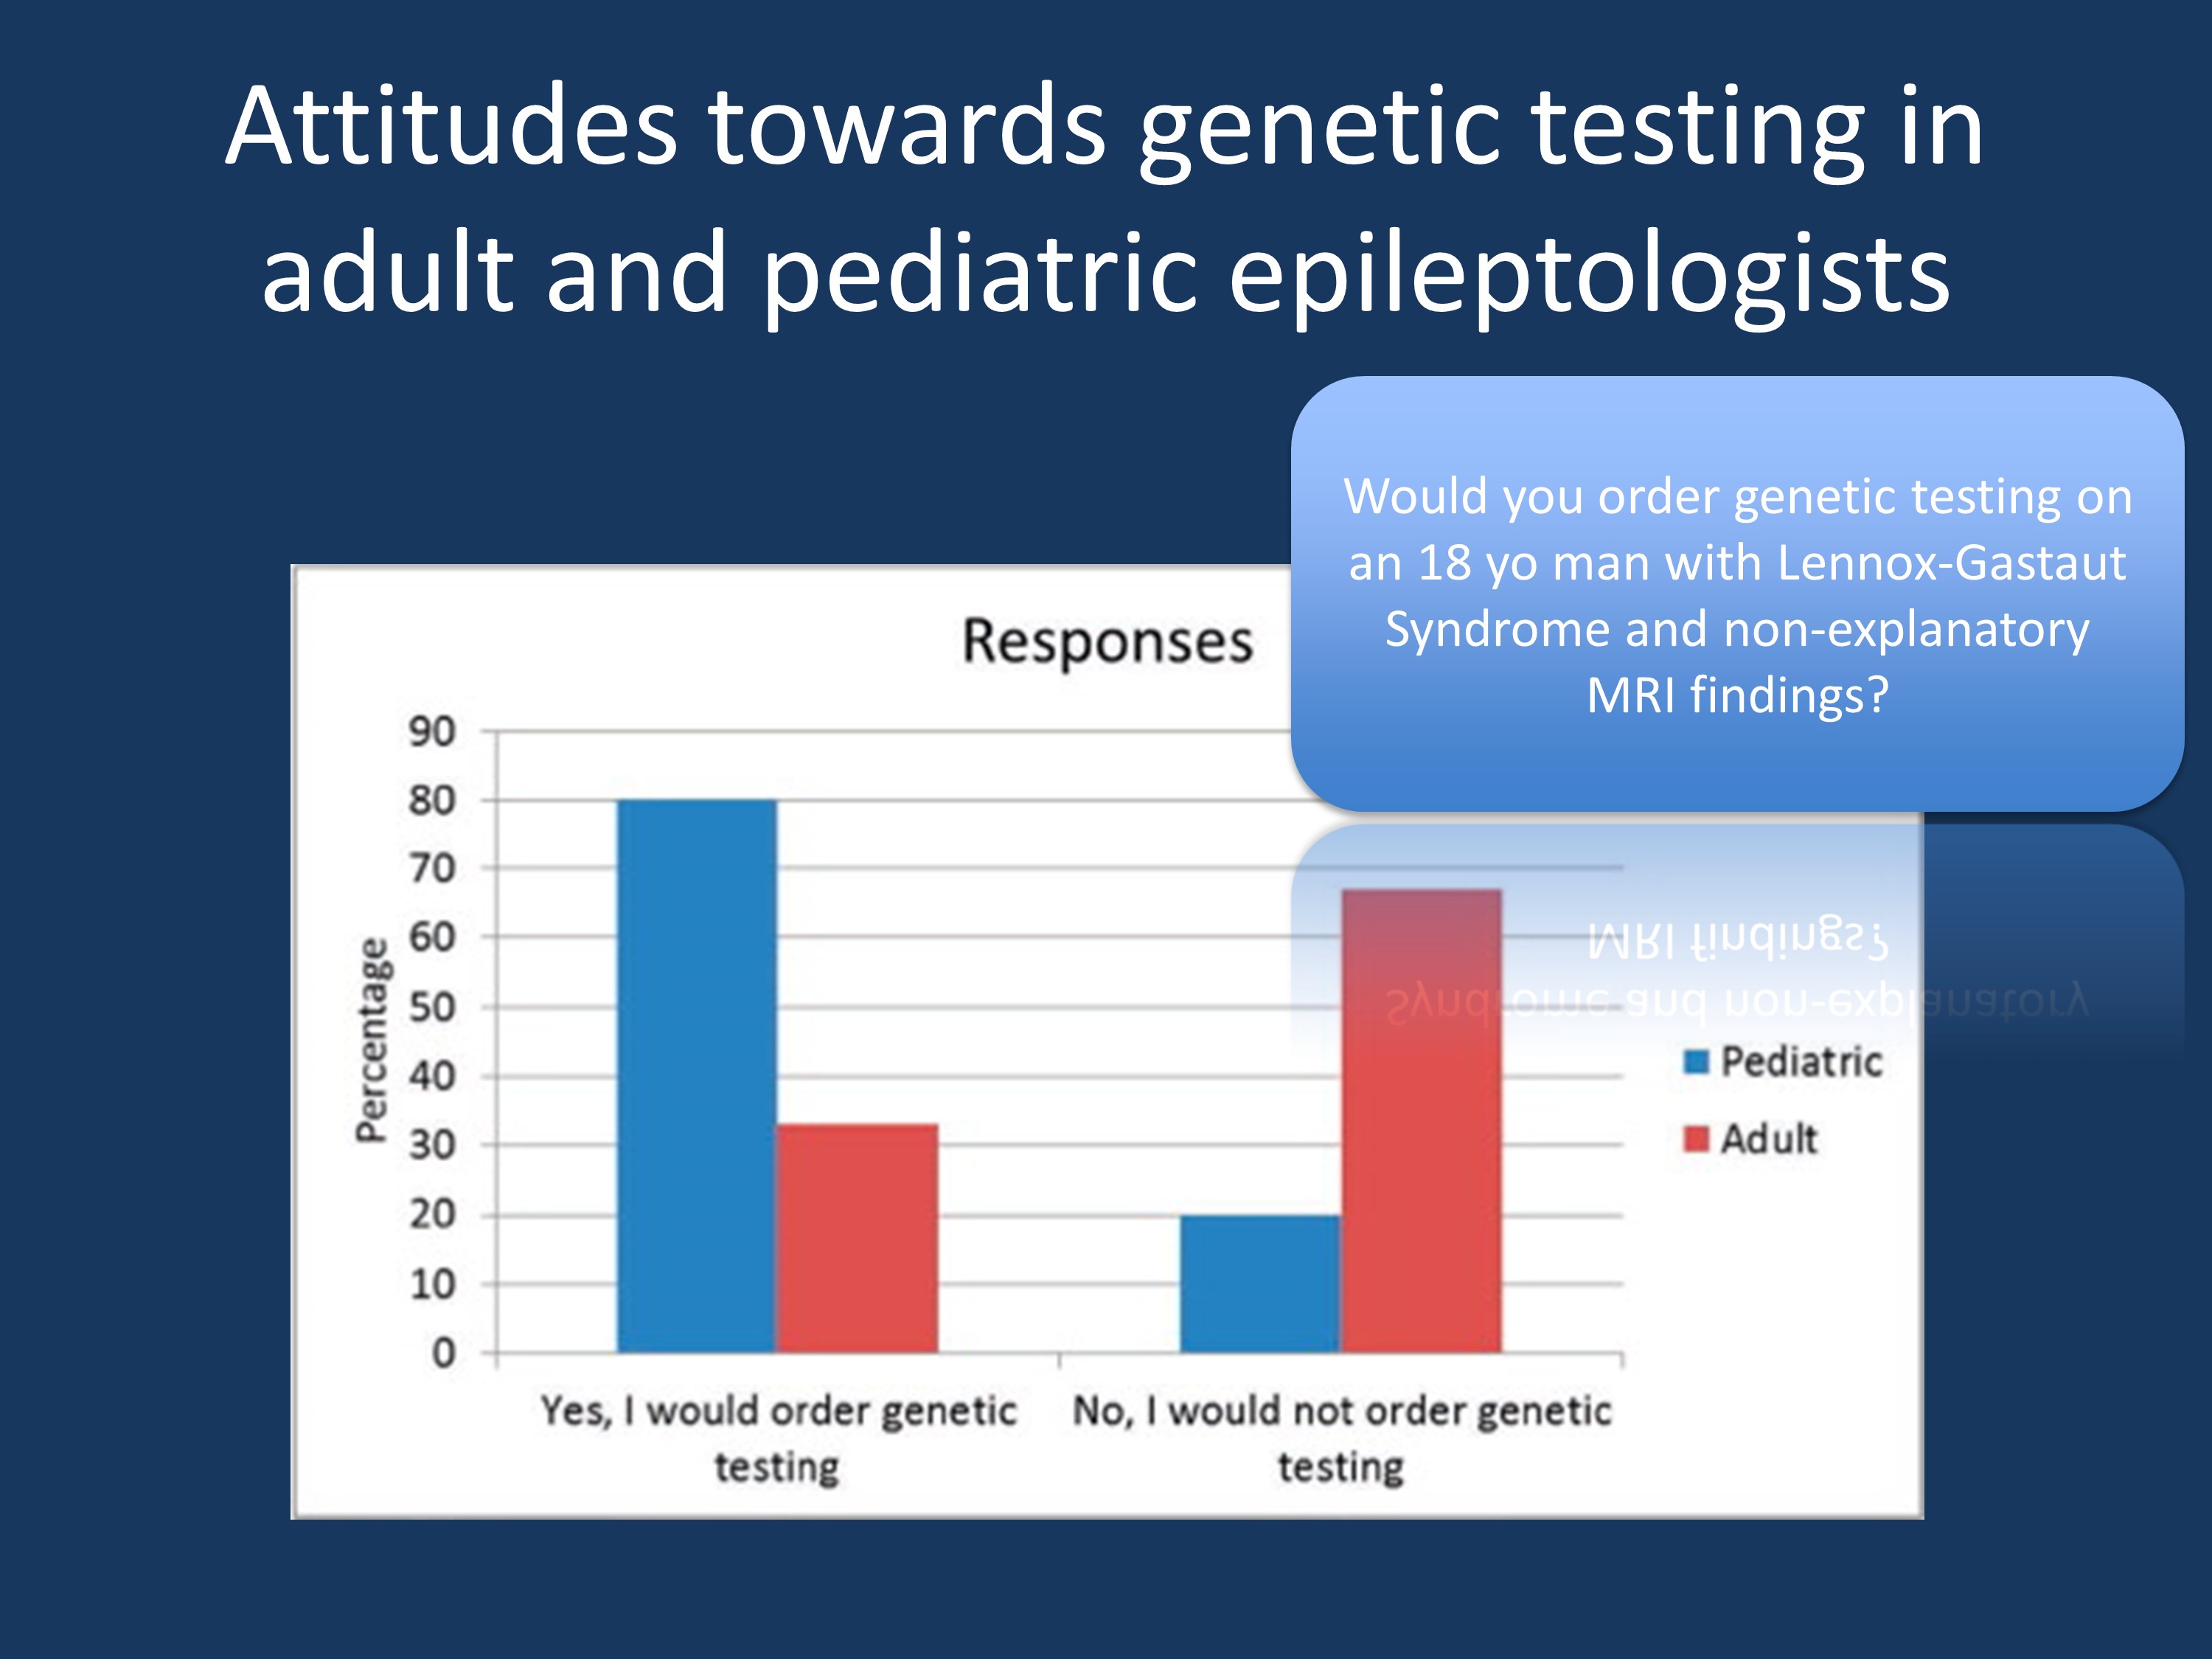 Figure 1. Would you order genetic testing?